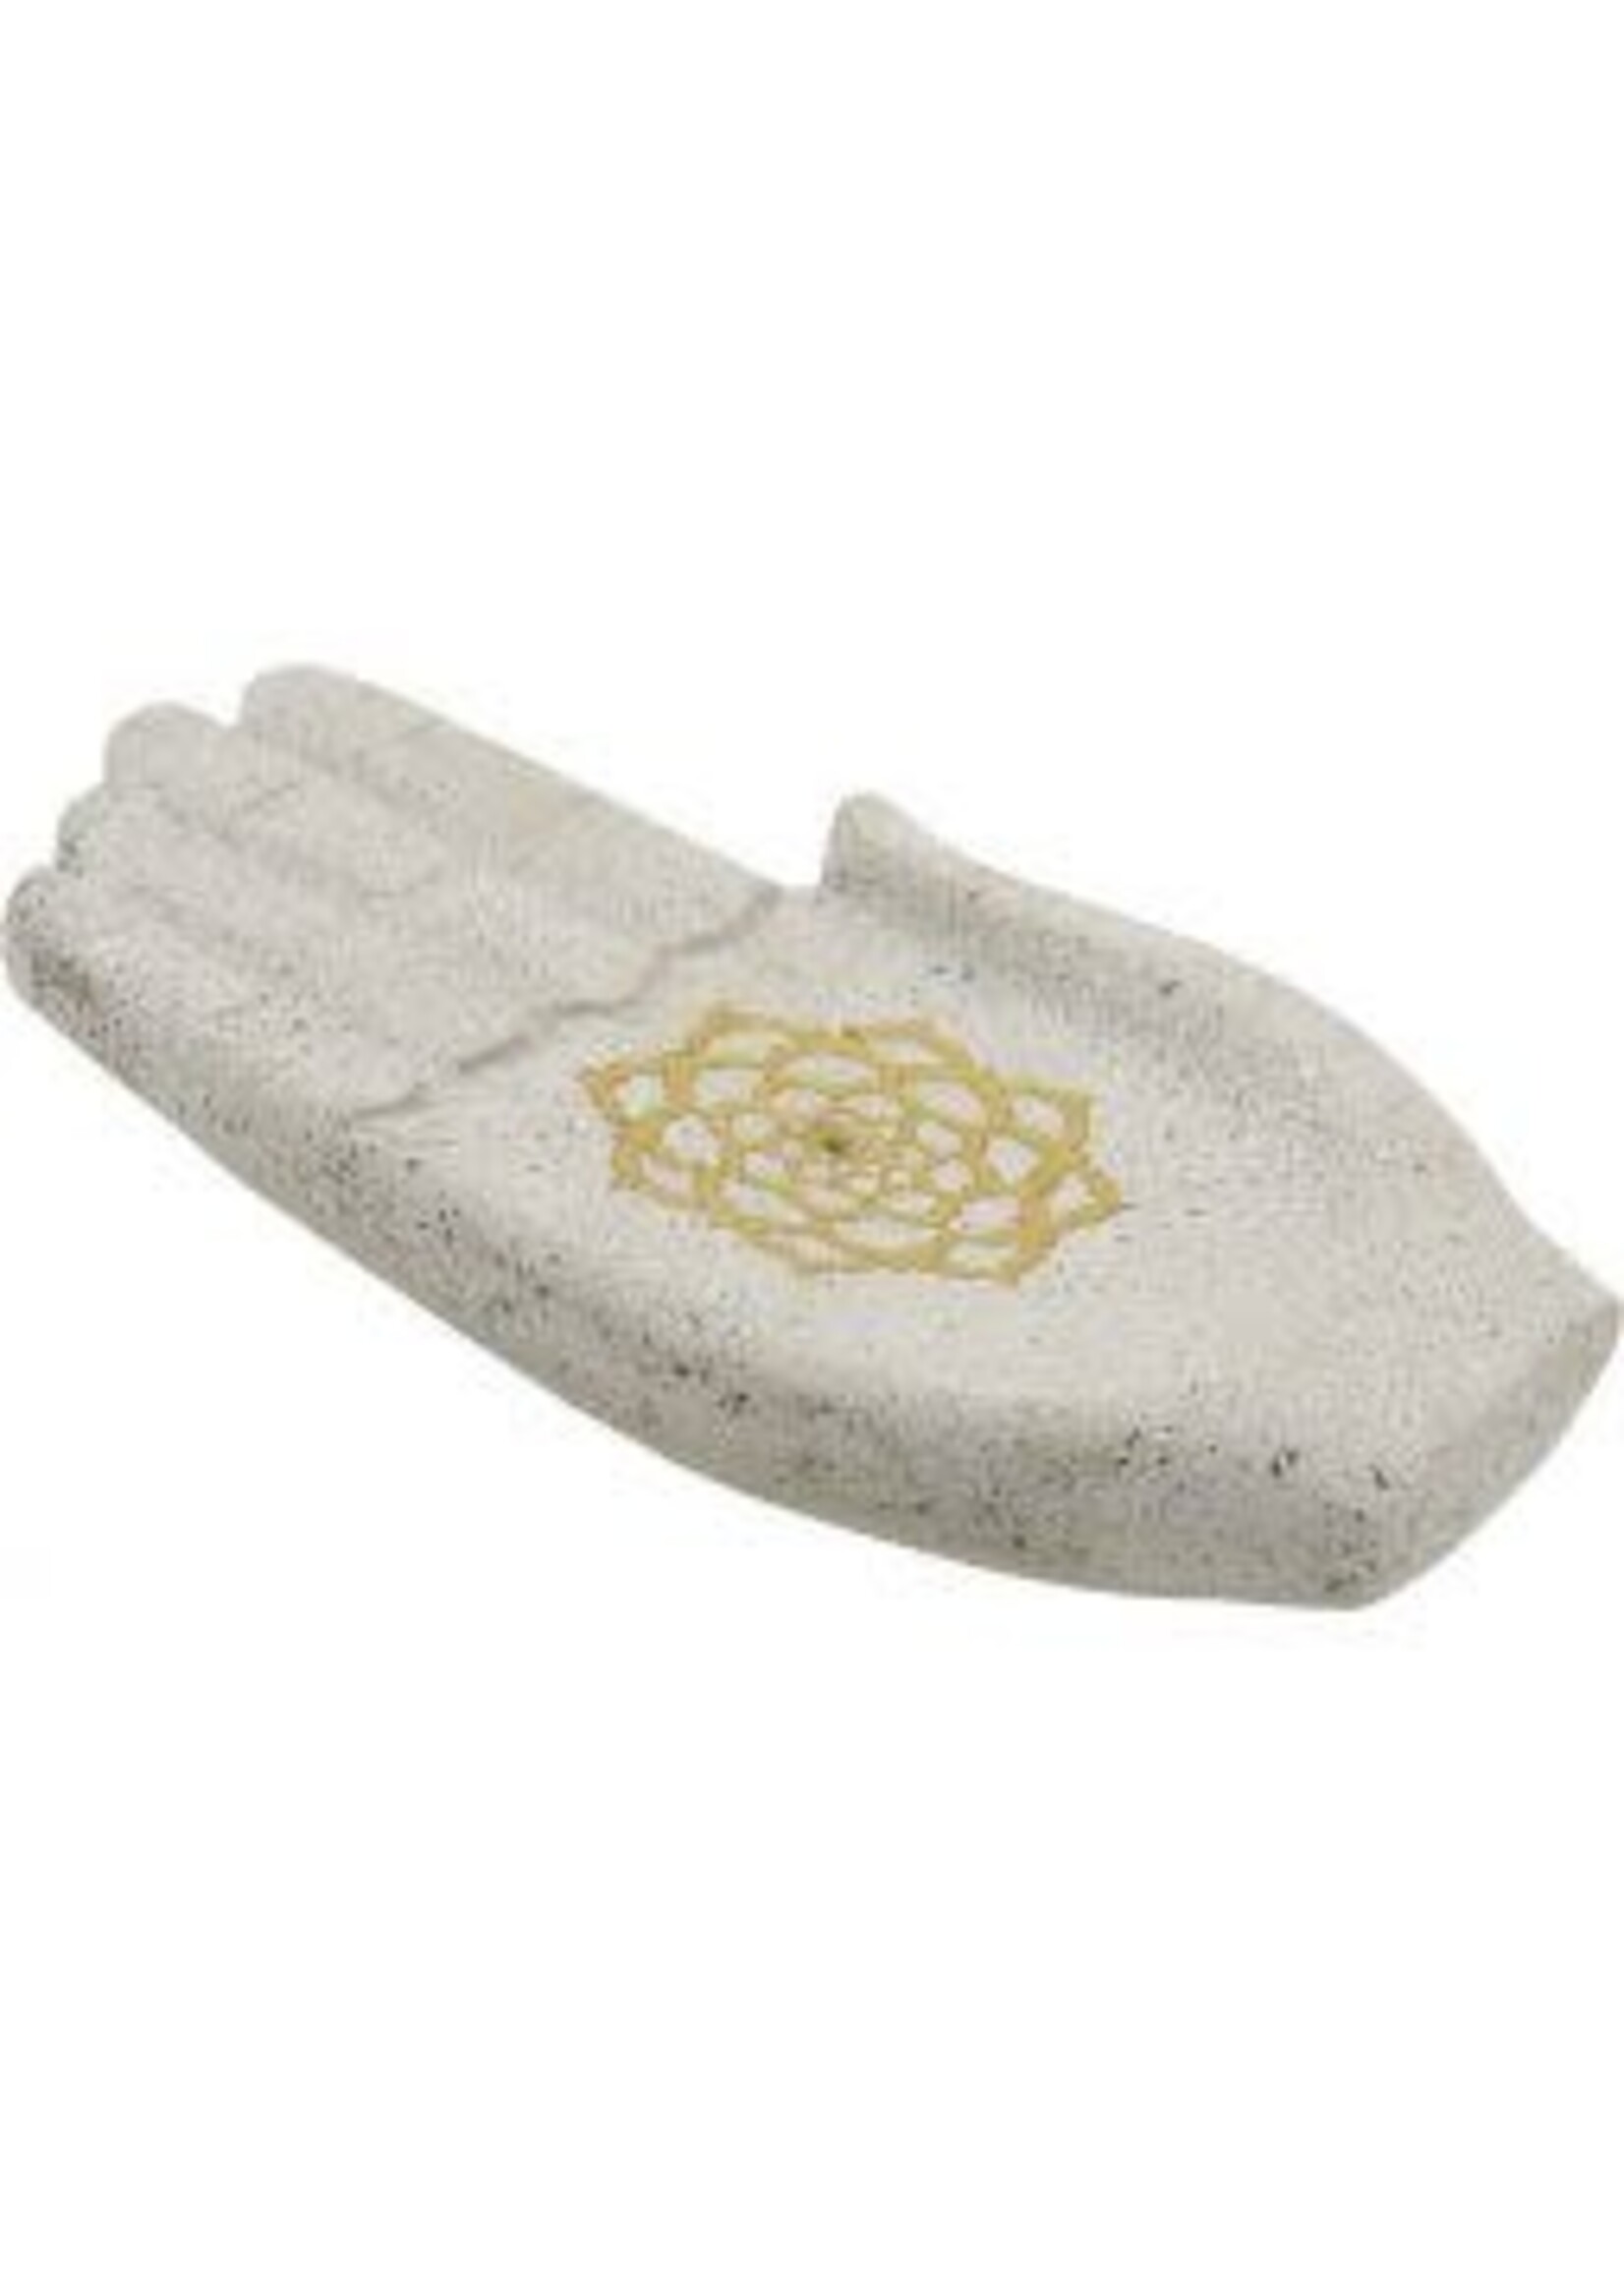 Recycled Resin Incense Holder - Hand w/Gold Lotus